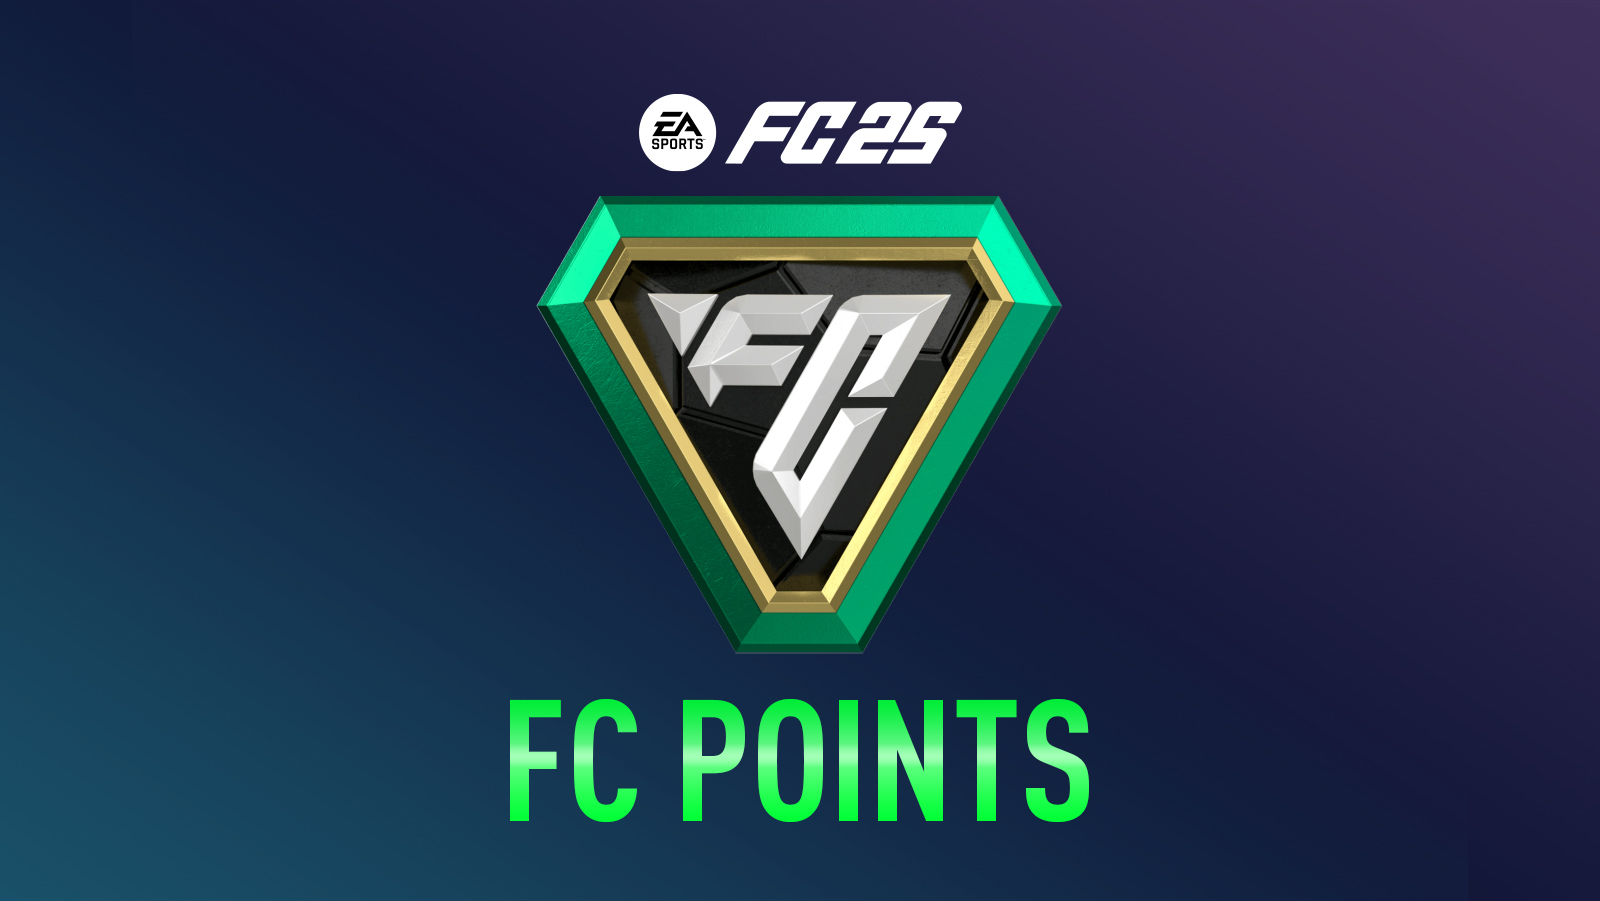 EA Sports FC Points price list and guide for FC 25 Ultimate Team.